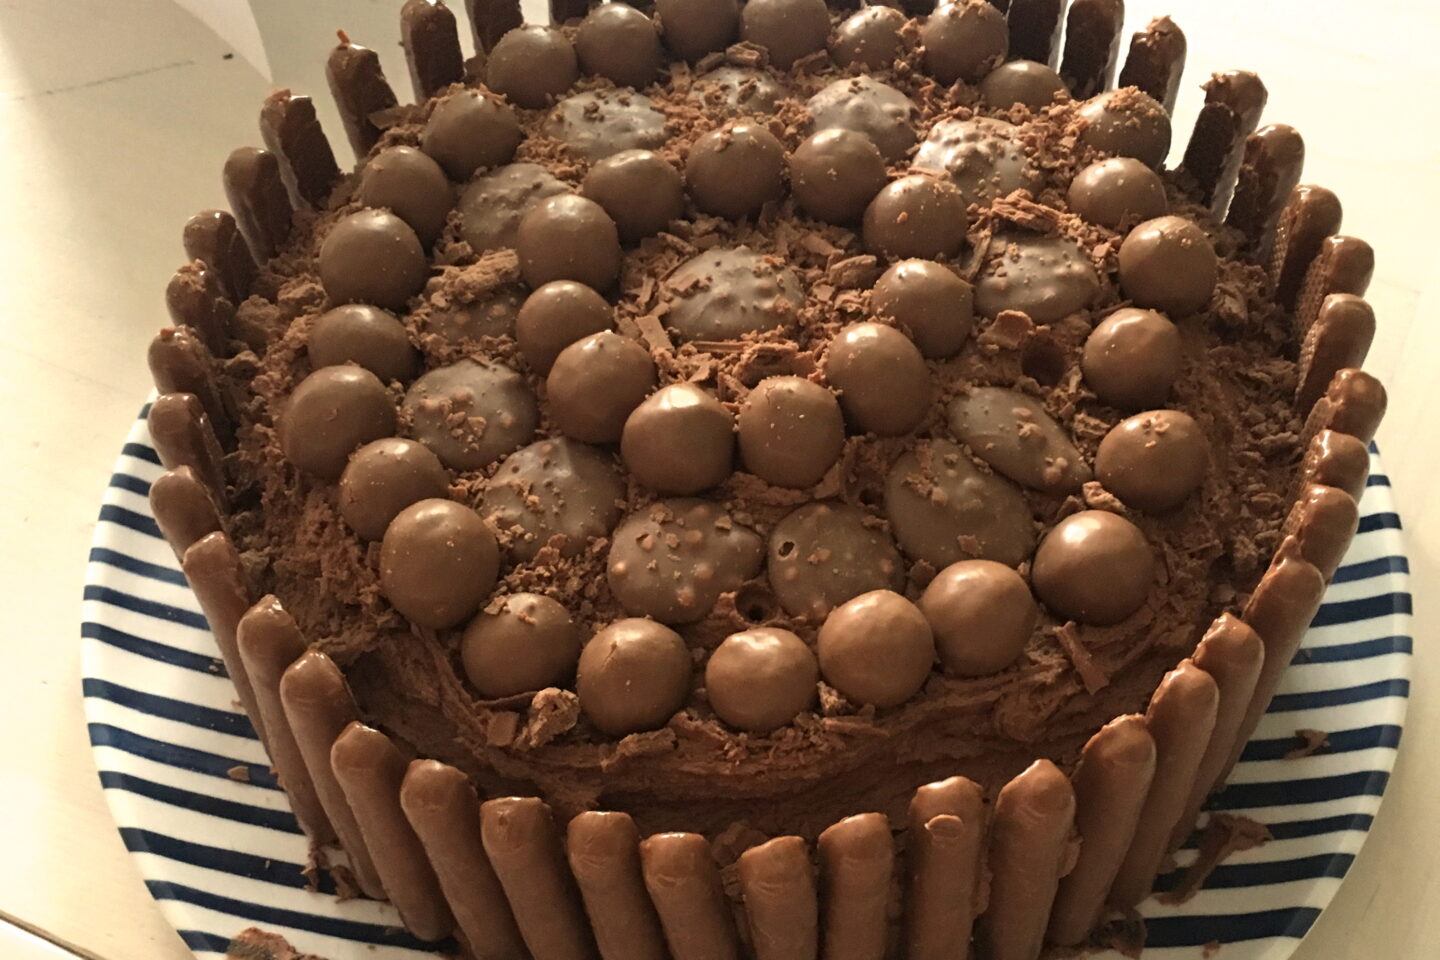 chocolate birthday cake decorated with chocolate buttons, maltesers and chocolate fingers for weekly gratitude